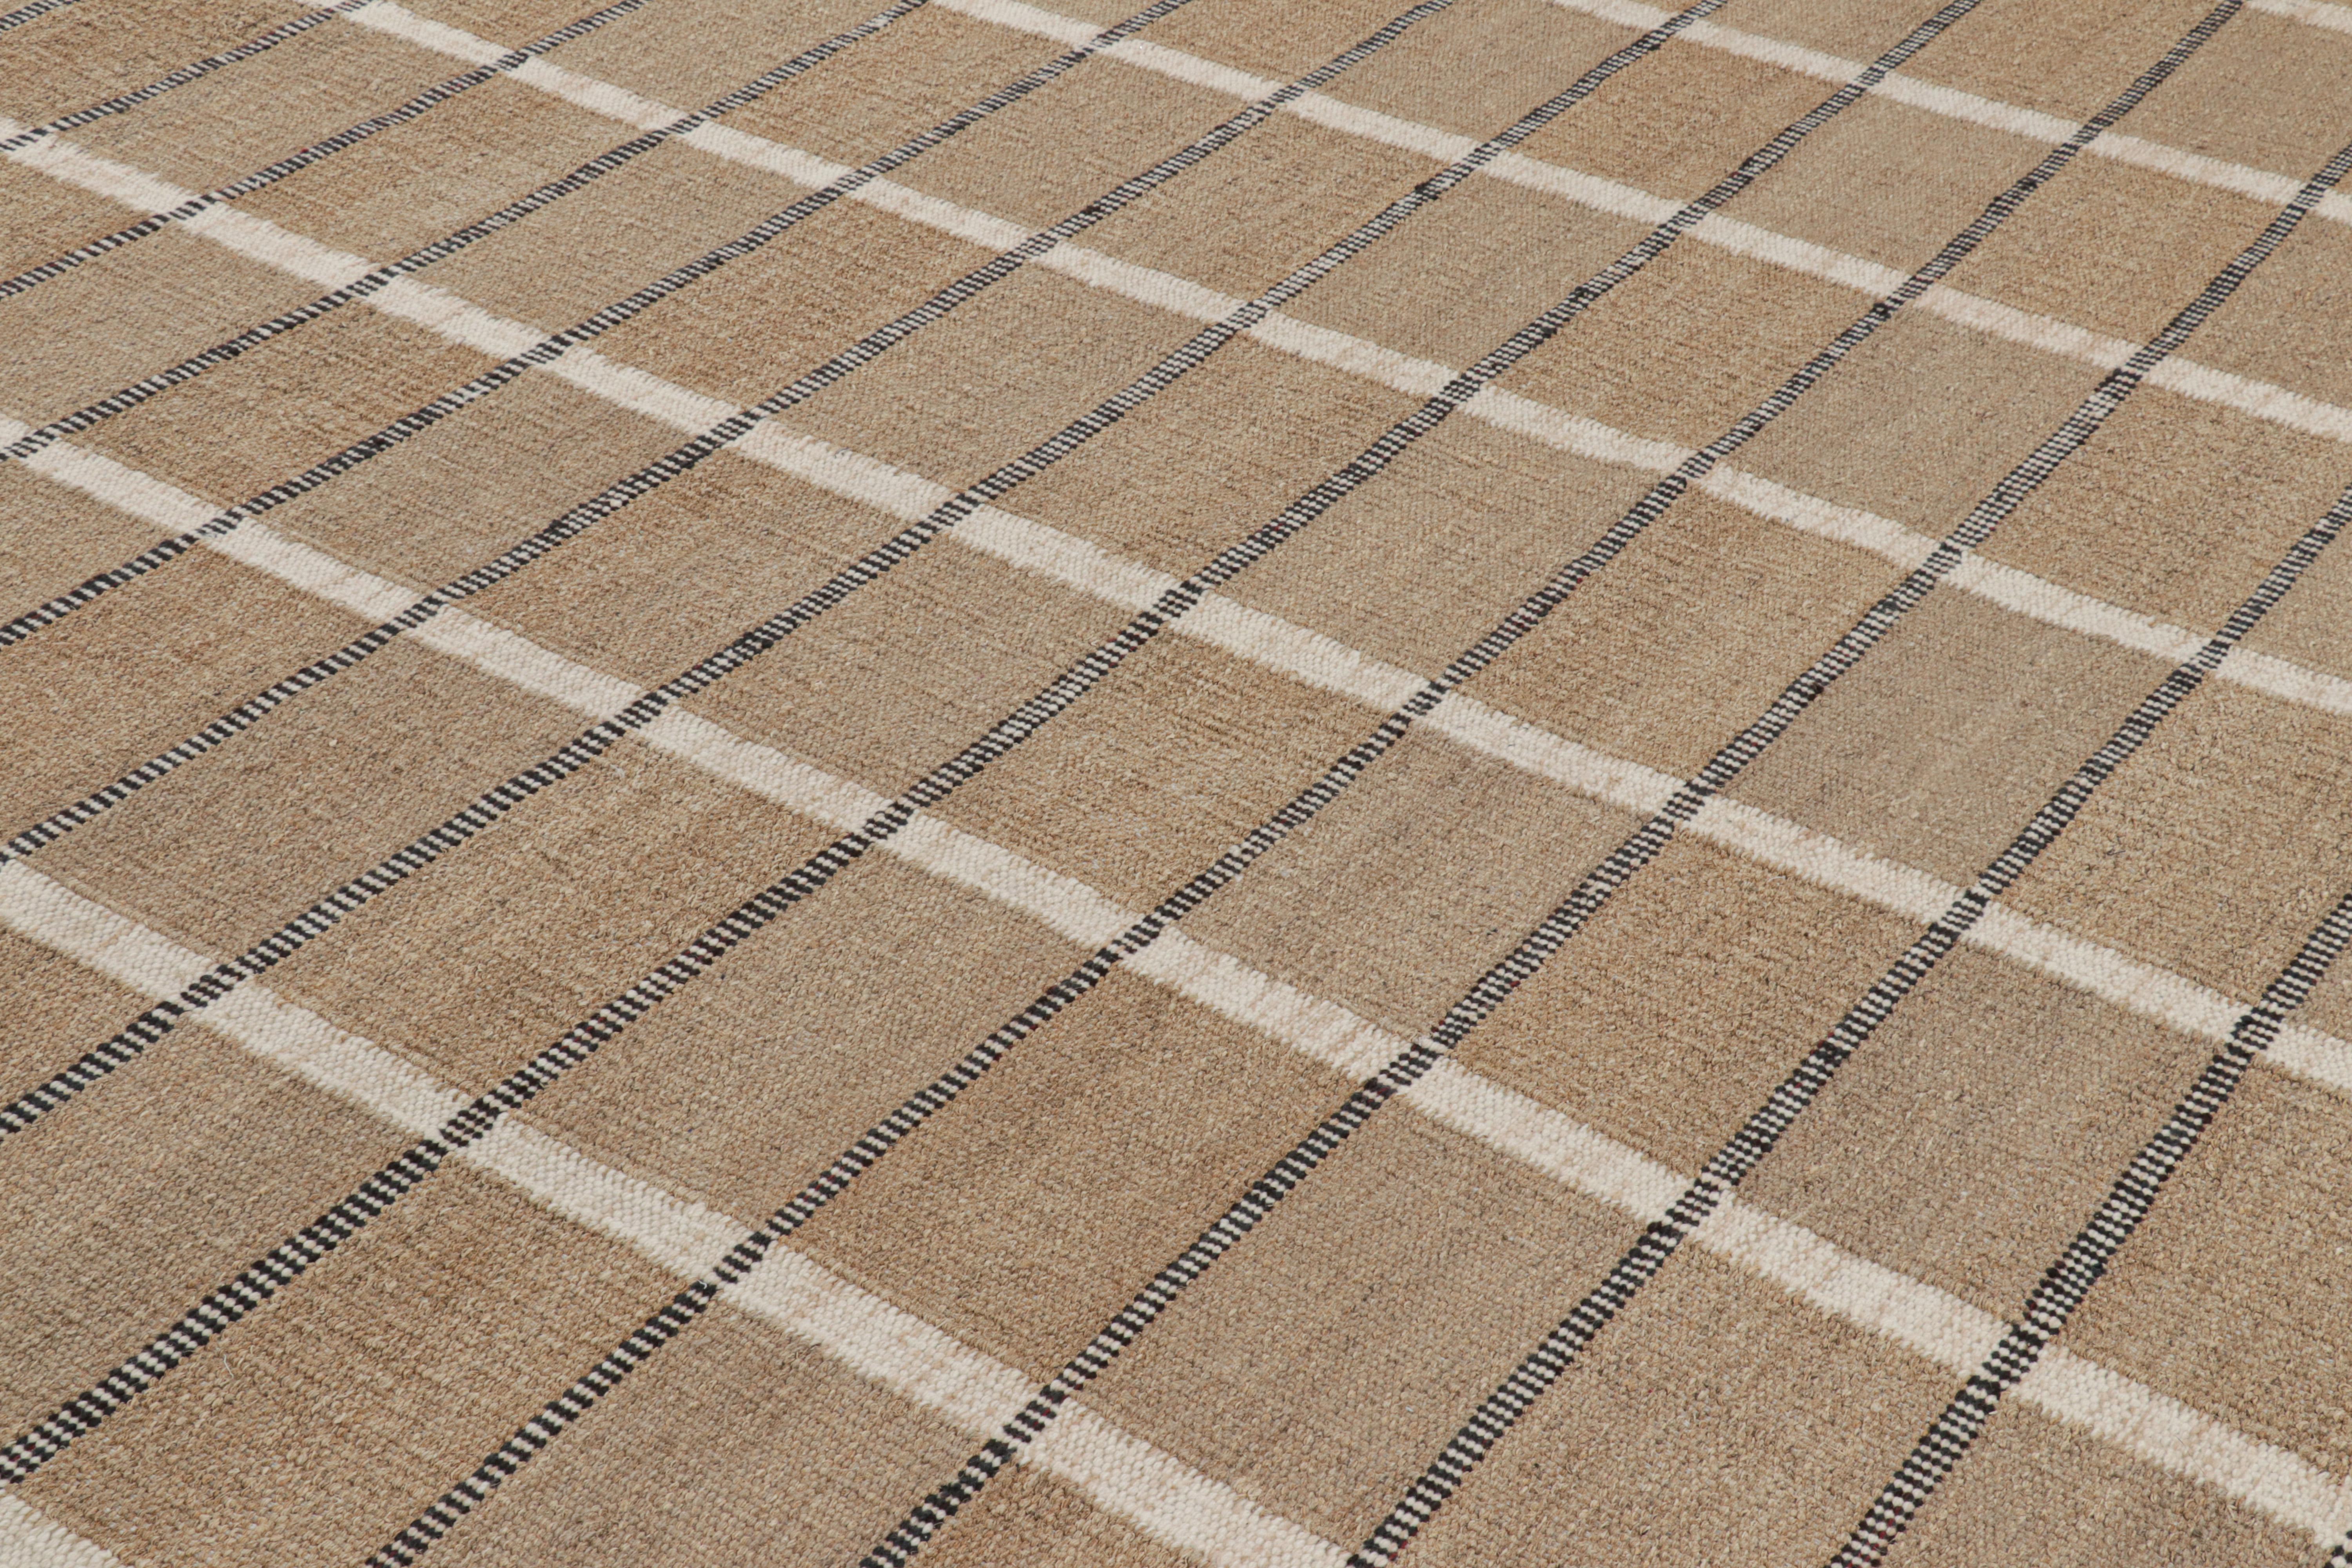 This 10x14 Swedish-style rug, handwoven in a hemp flatweave, is from the Natural line in Rug & Kilim’s Scandinavian rug collection—inspired by mid-century designs of the acclaimed minimalist aesthetic.

On the Design: 

Keen eyes will admire the